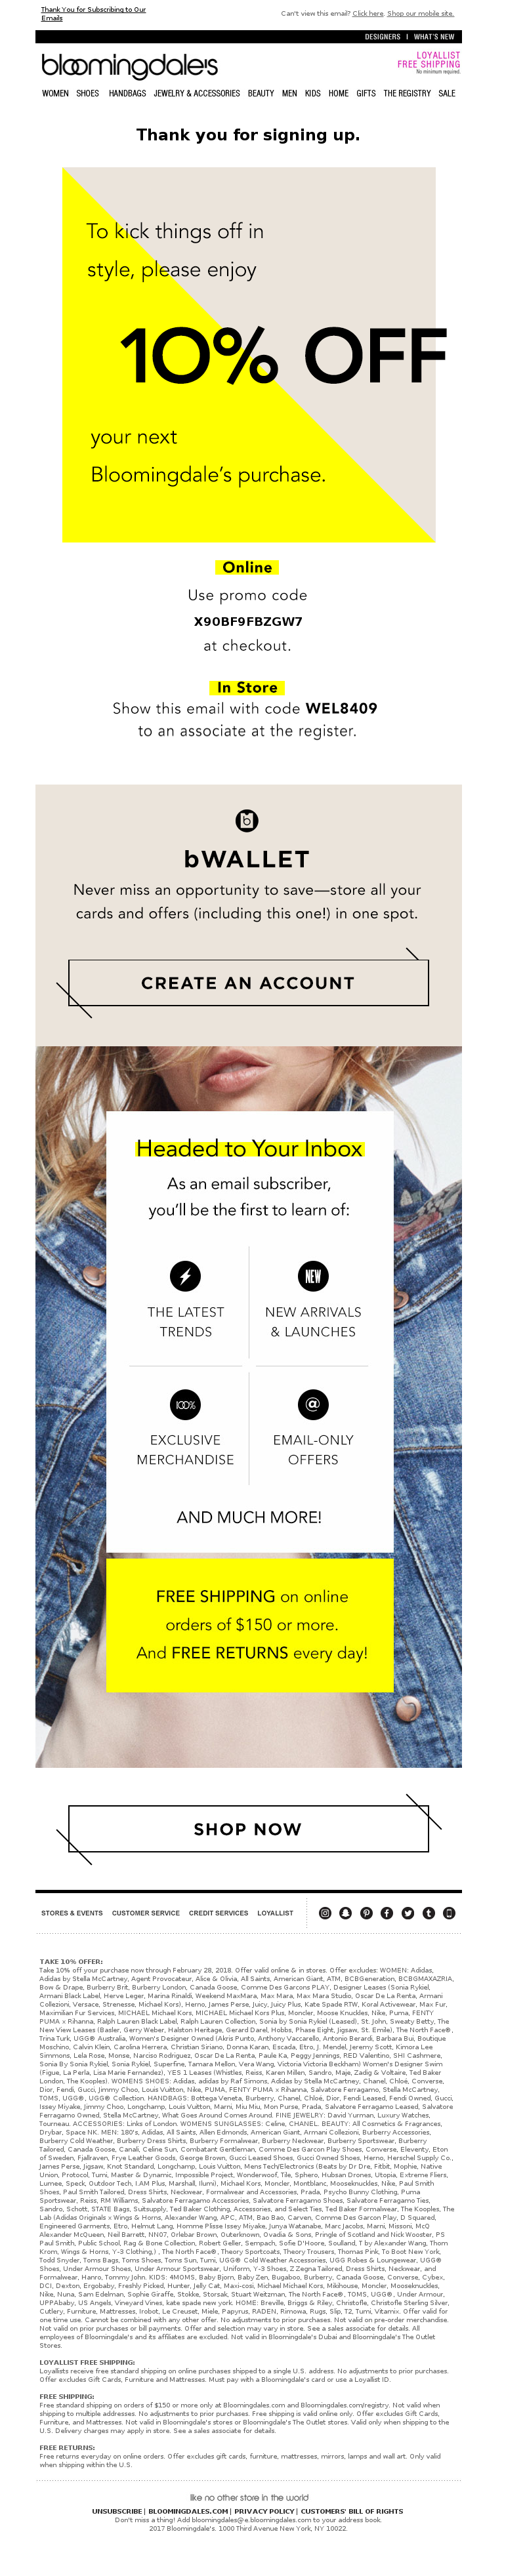 Bloomingdale's Unboxing Experience - MailCharts